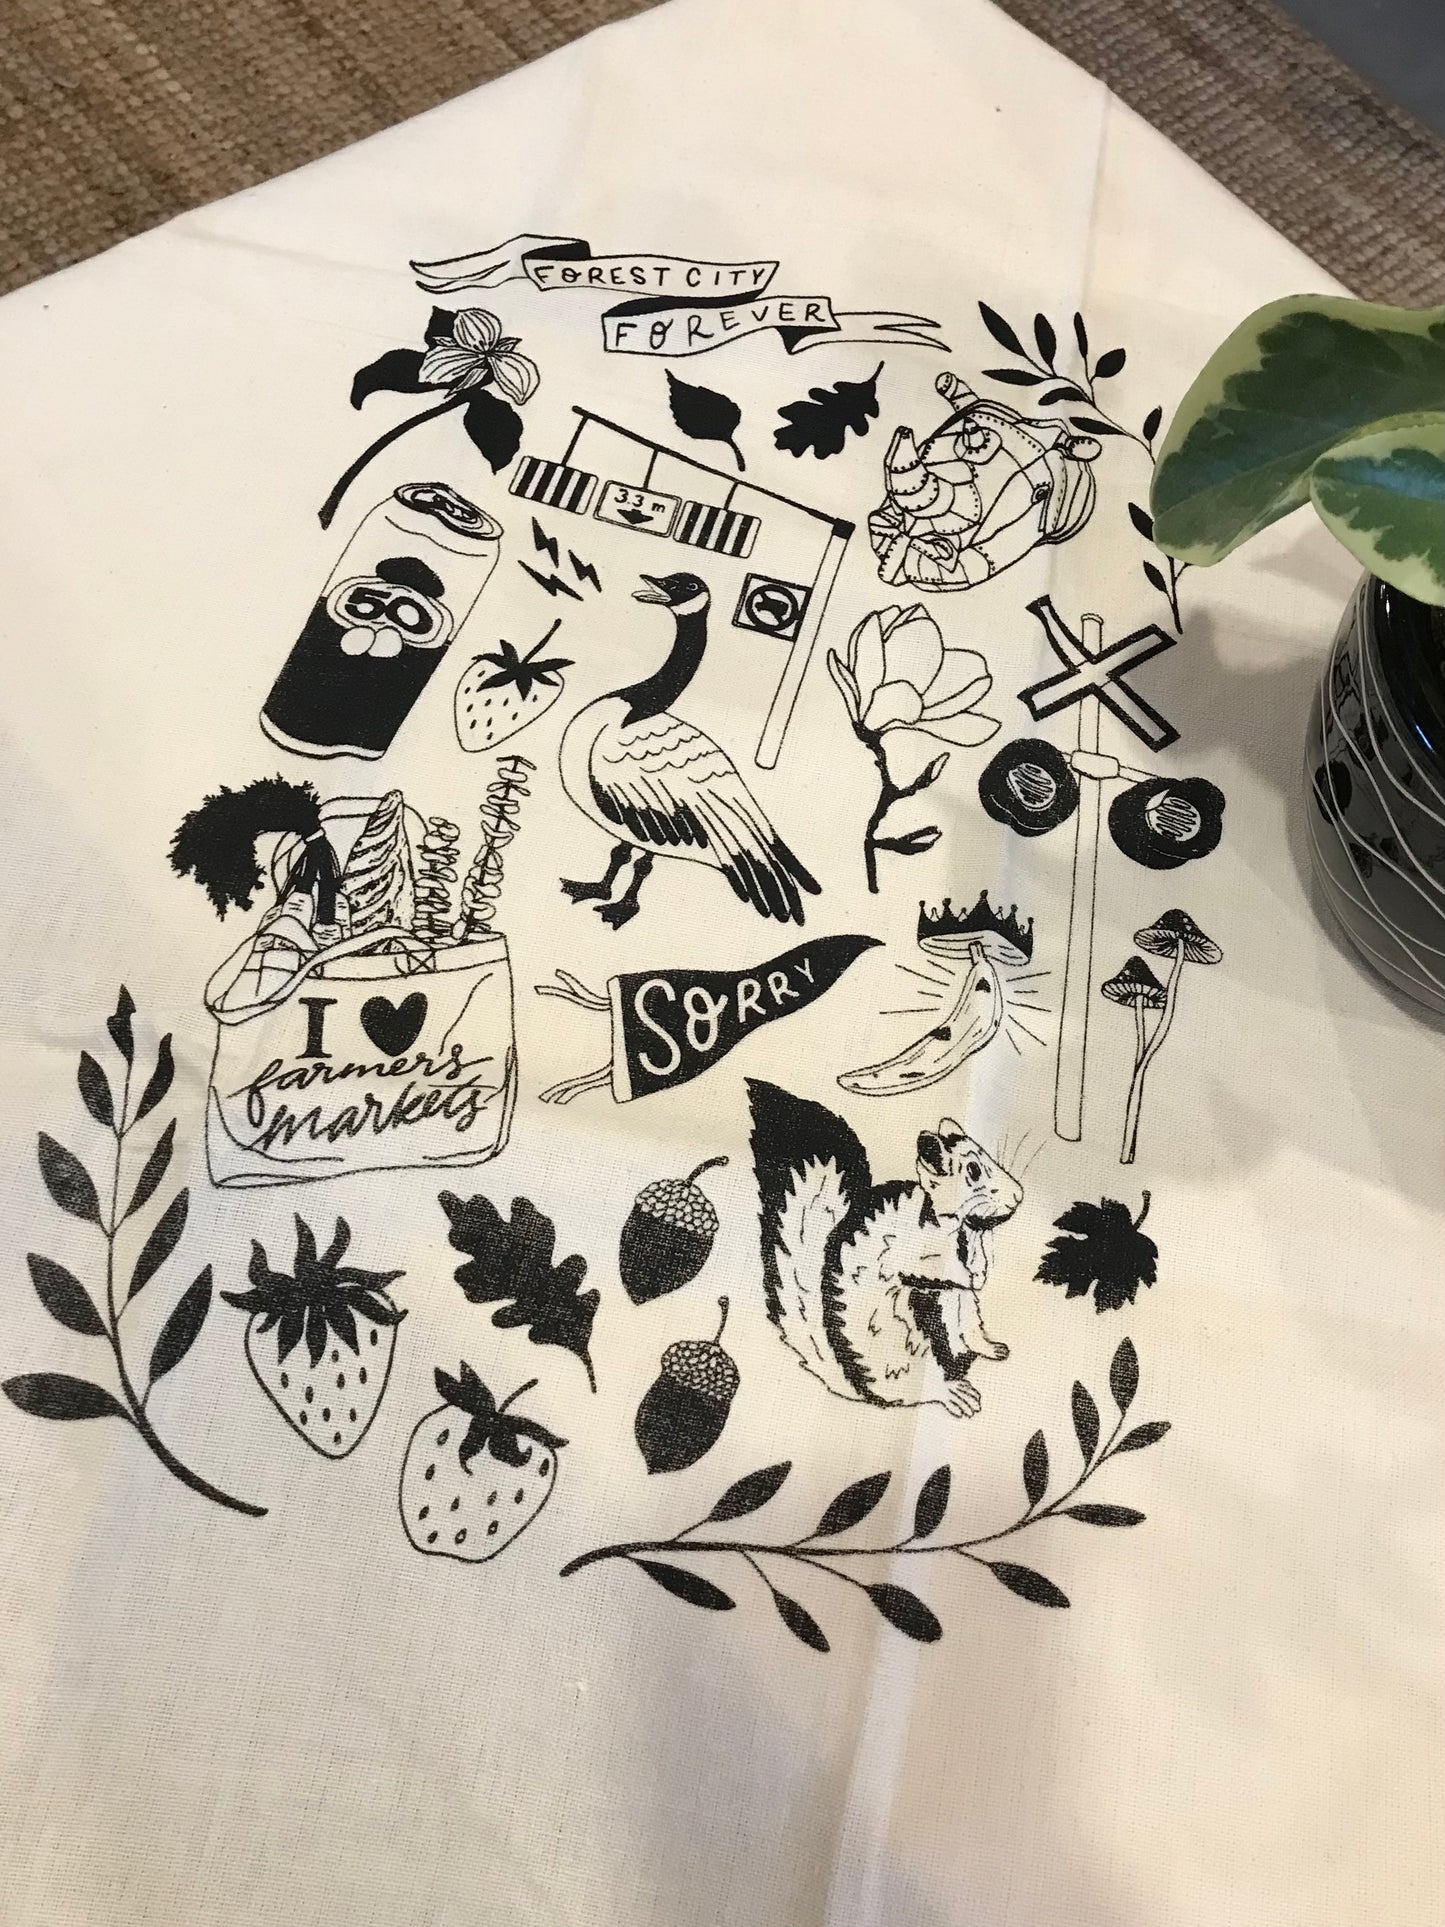 forest city forever tea towel